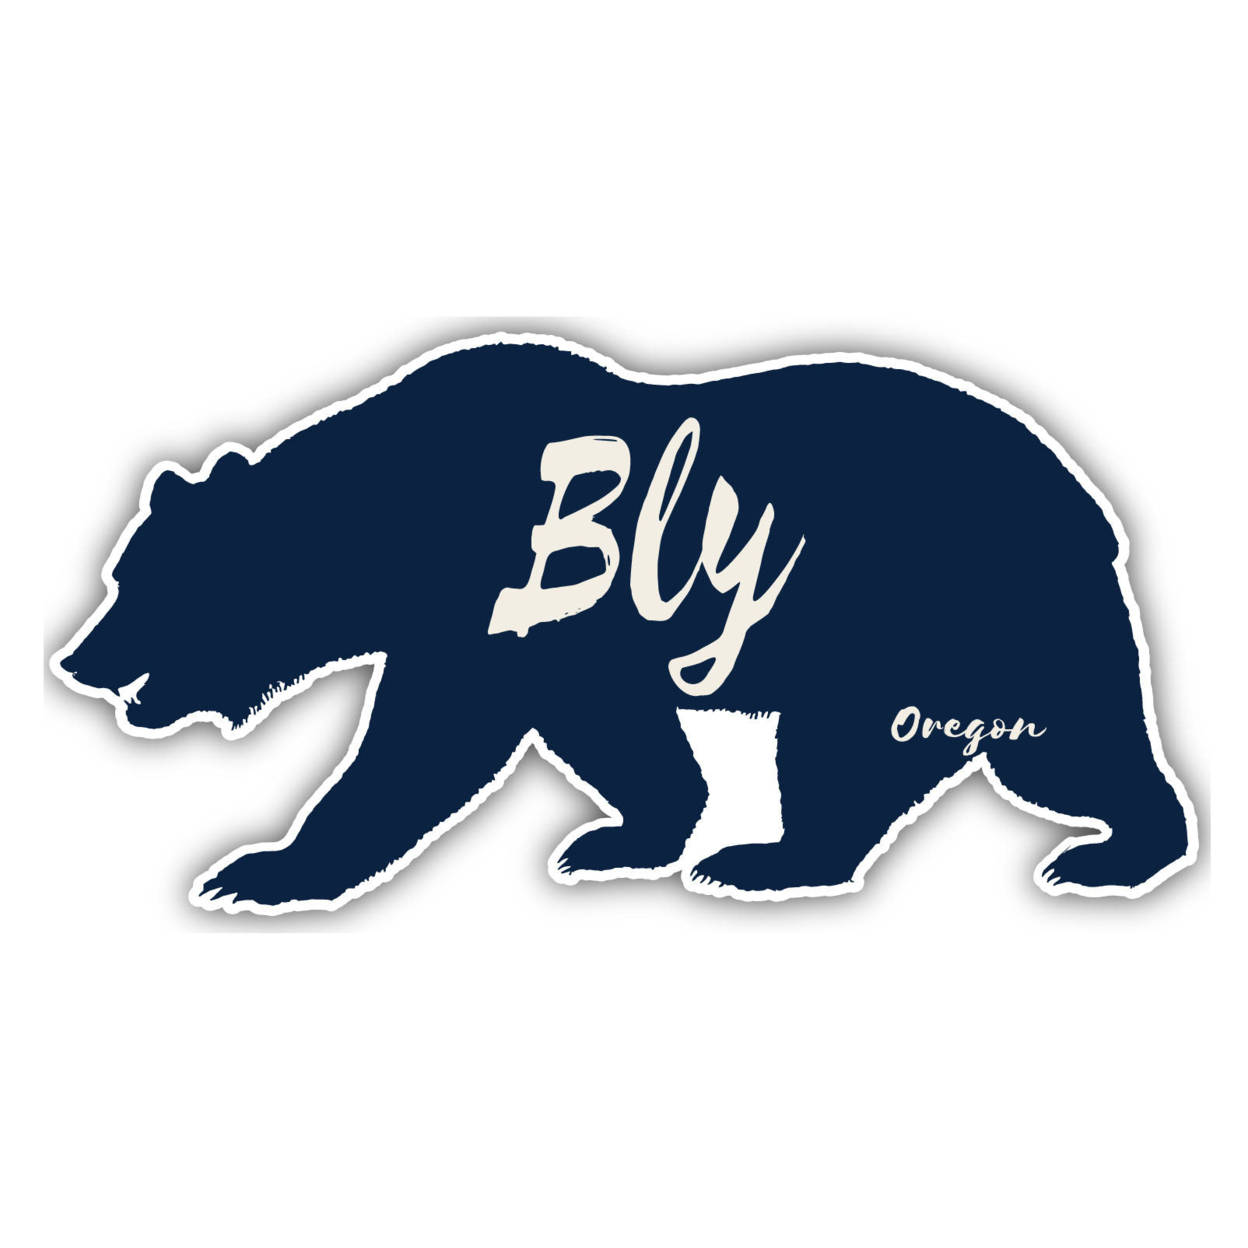 Bly Oregon Souvenir Decorative Stickers (Choose Theme And Size) - 4-Pack, 10-Inch, Bear